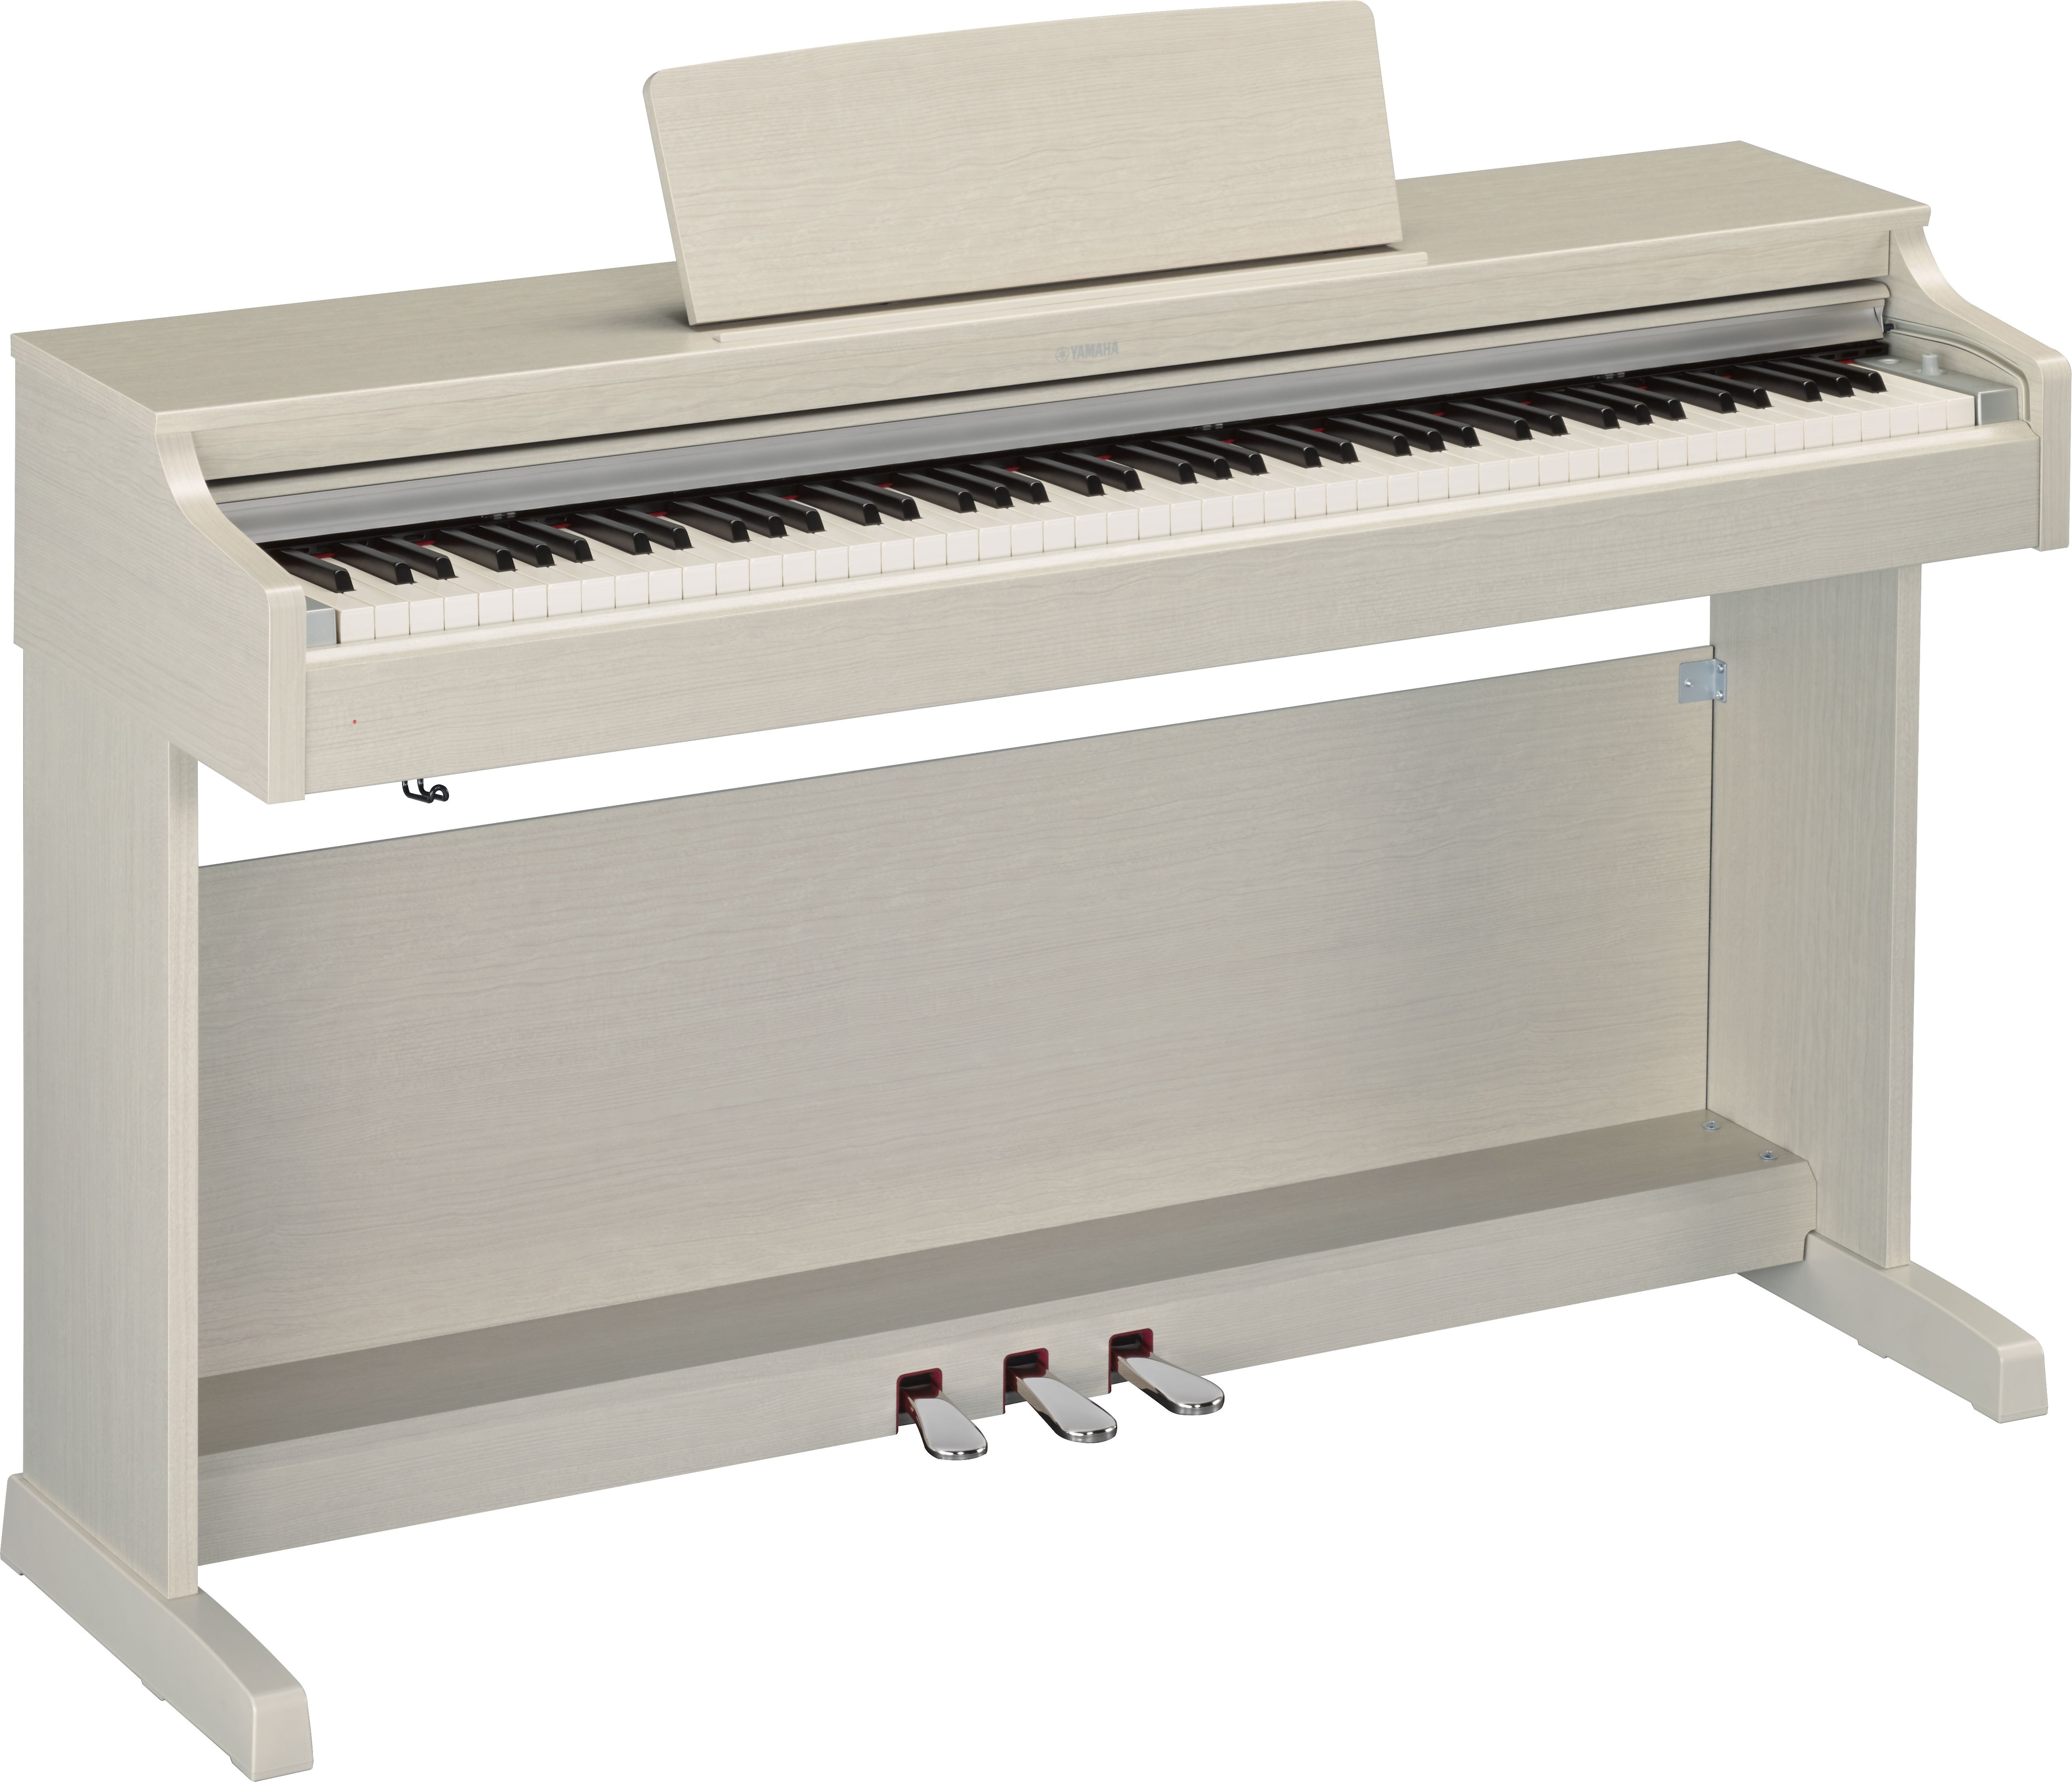 YDP-163 - Overview - ARIUS - Pianos - Musical Instruments 